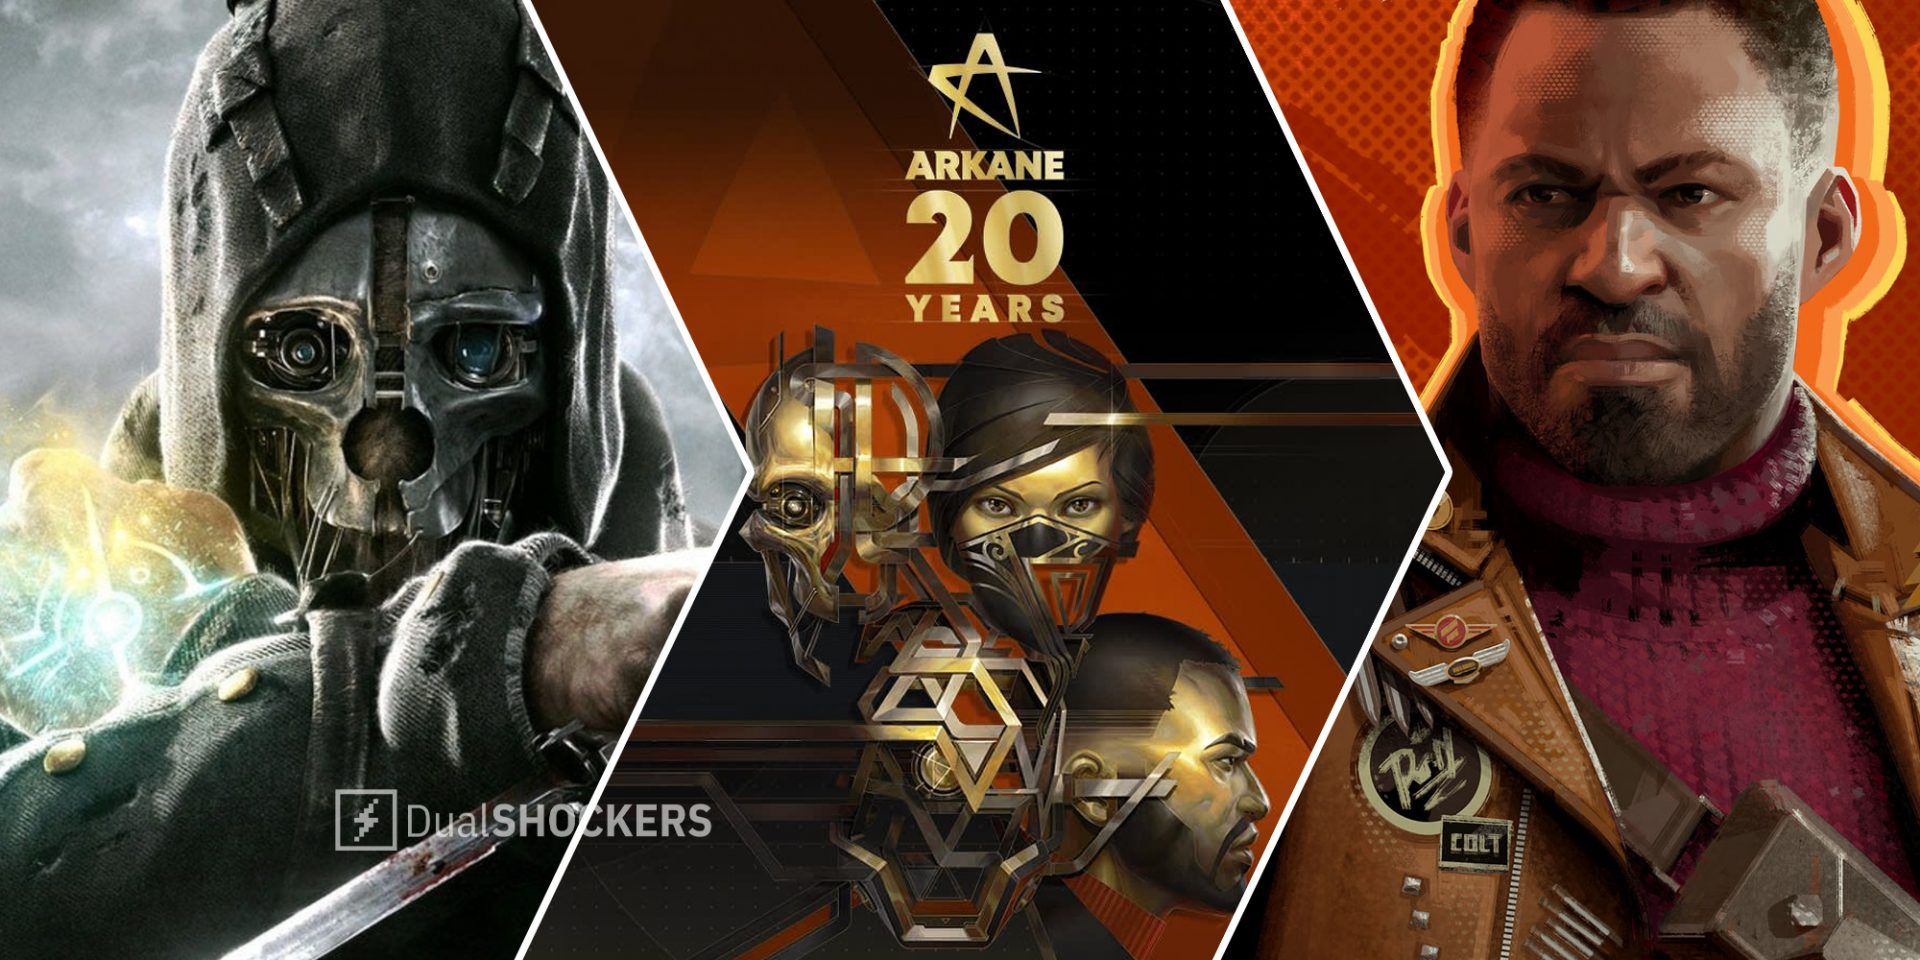 Dishonored on left, Arkane Studios 20 anniversary promo image in middle, Deathloop on right